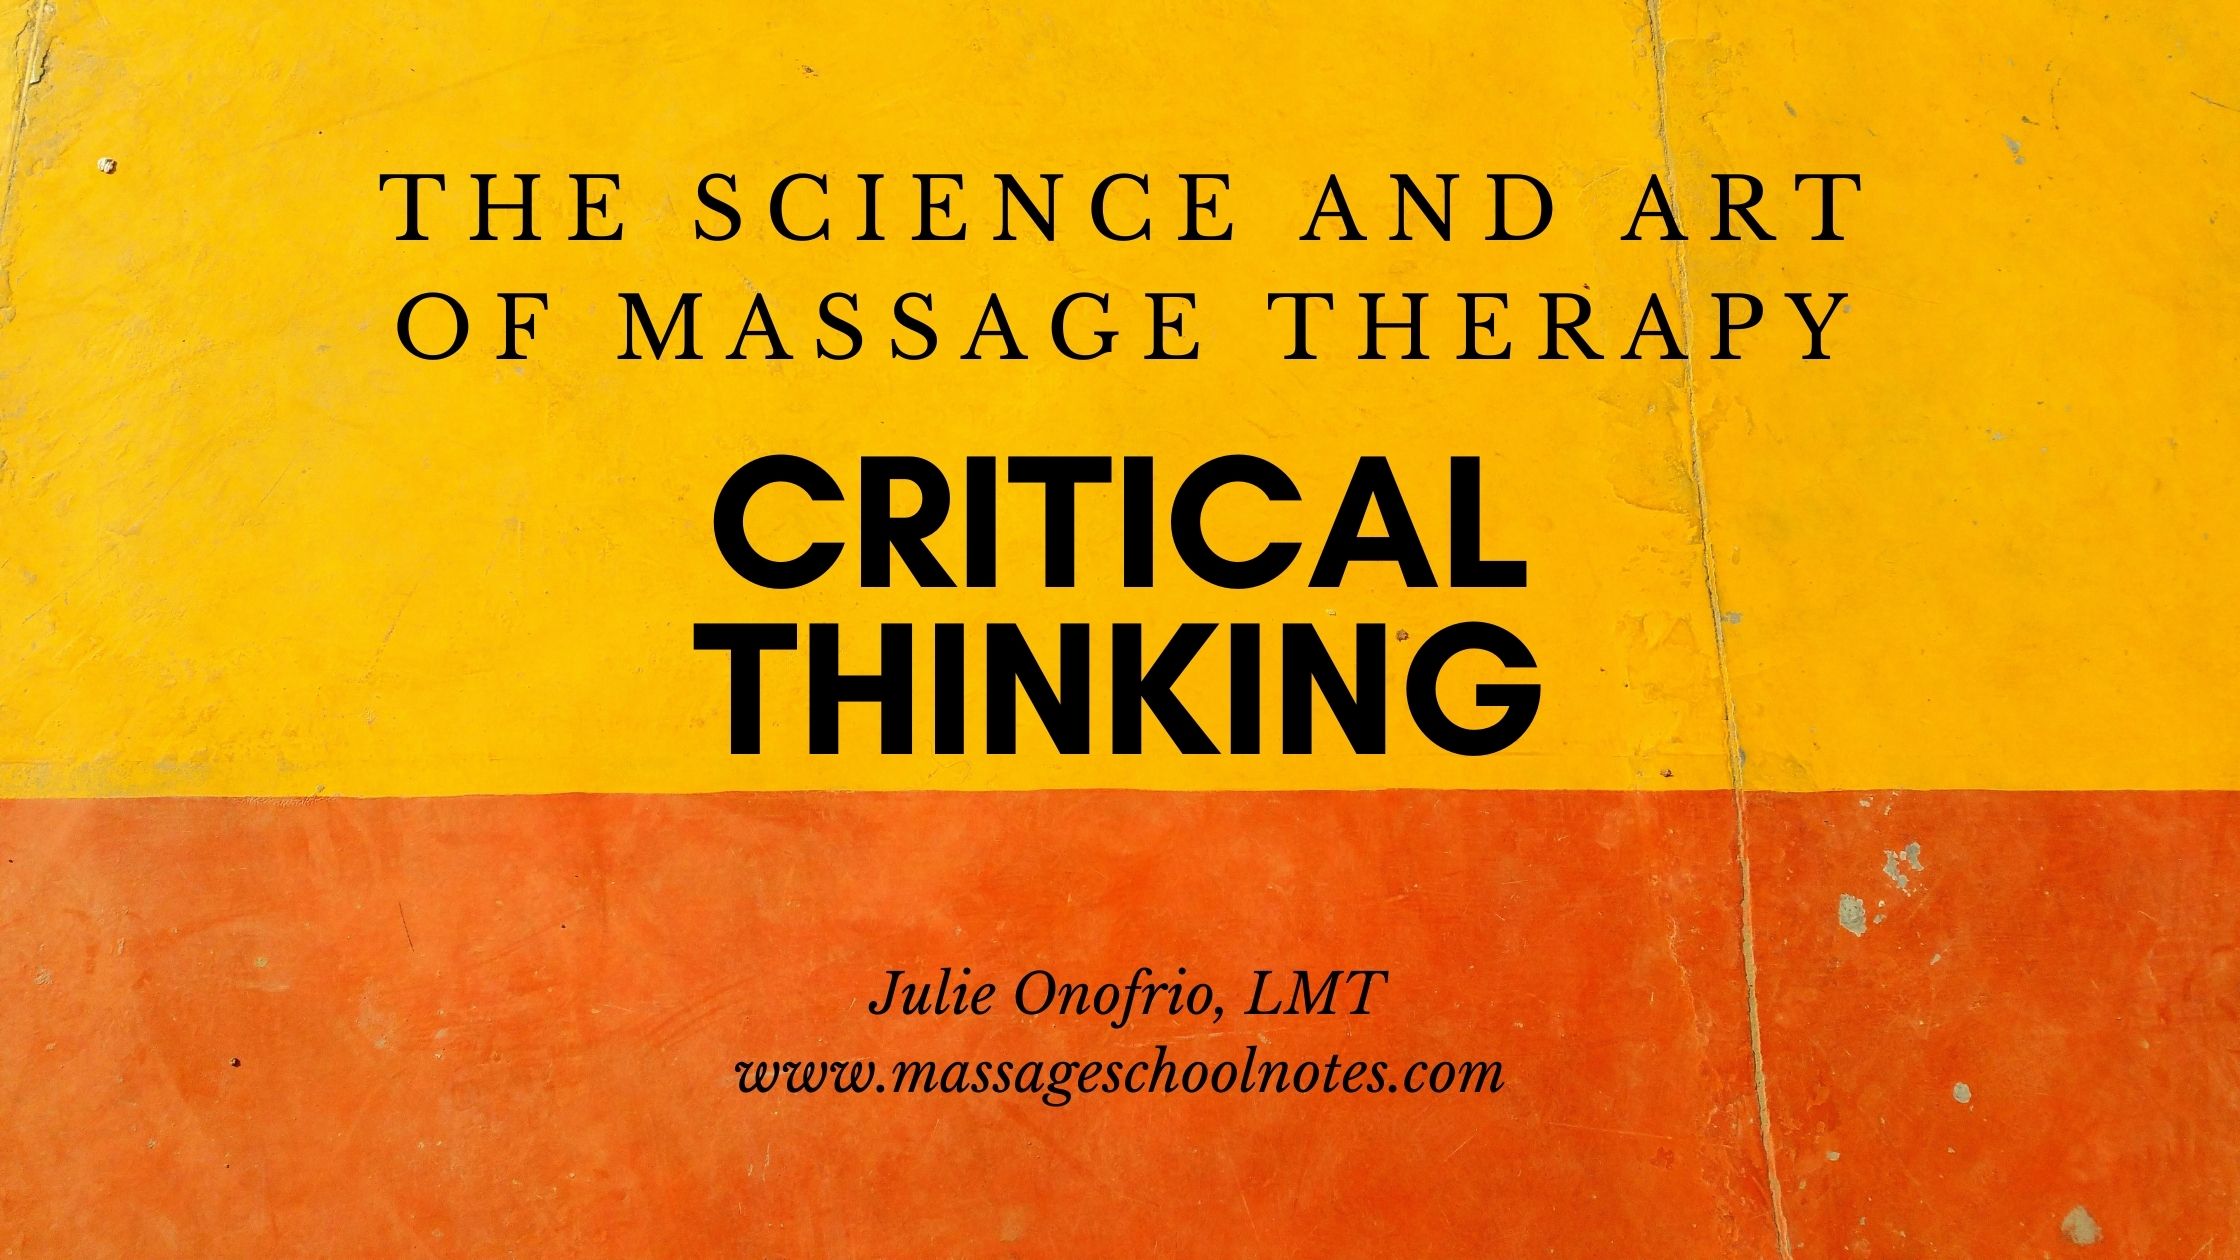 critical thinking for massage therapists